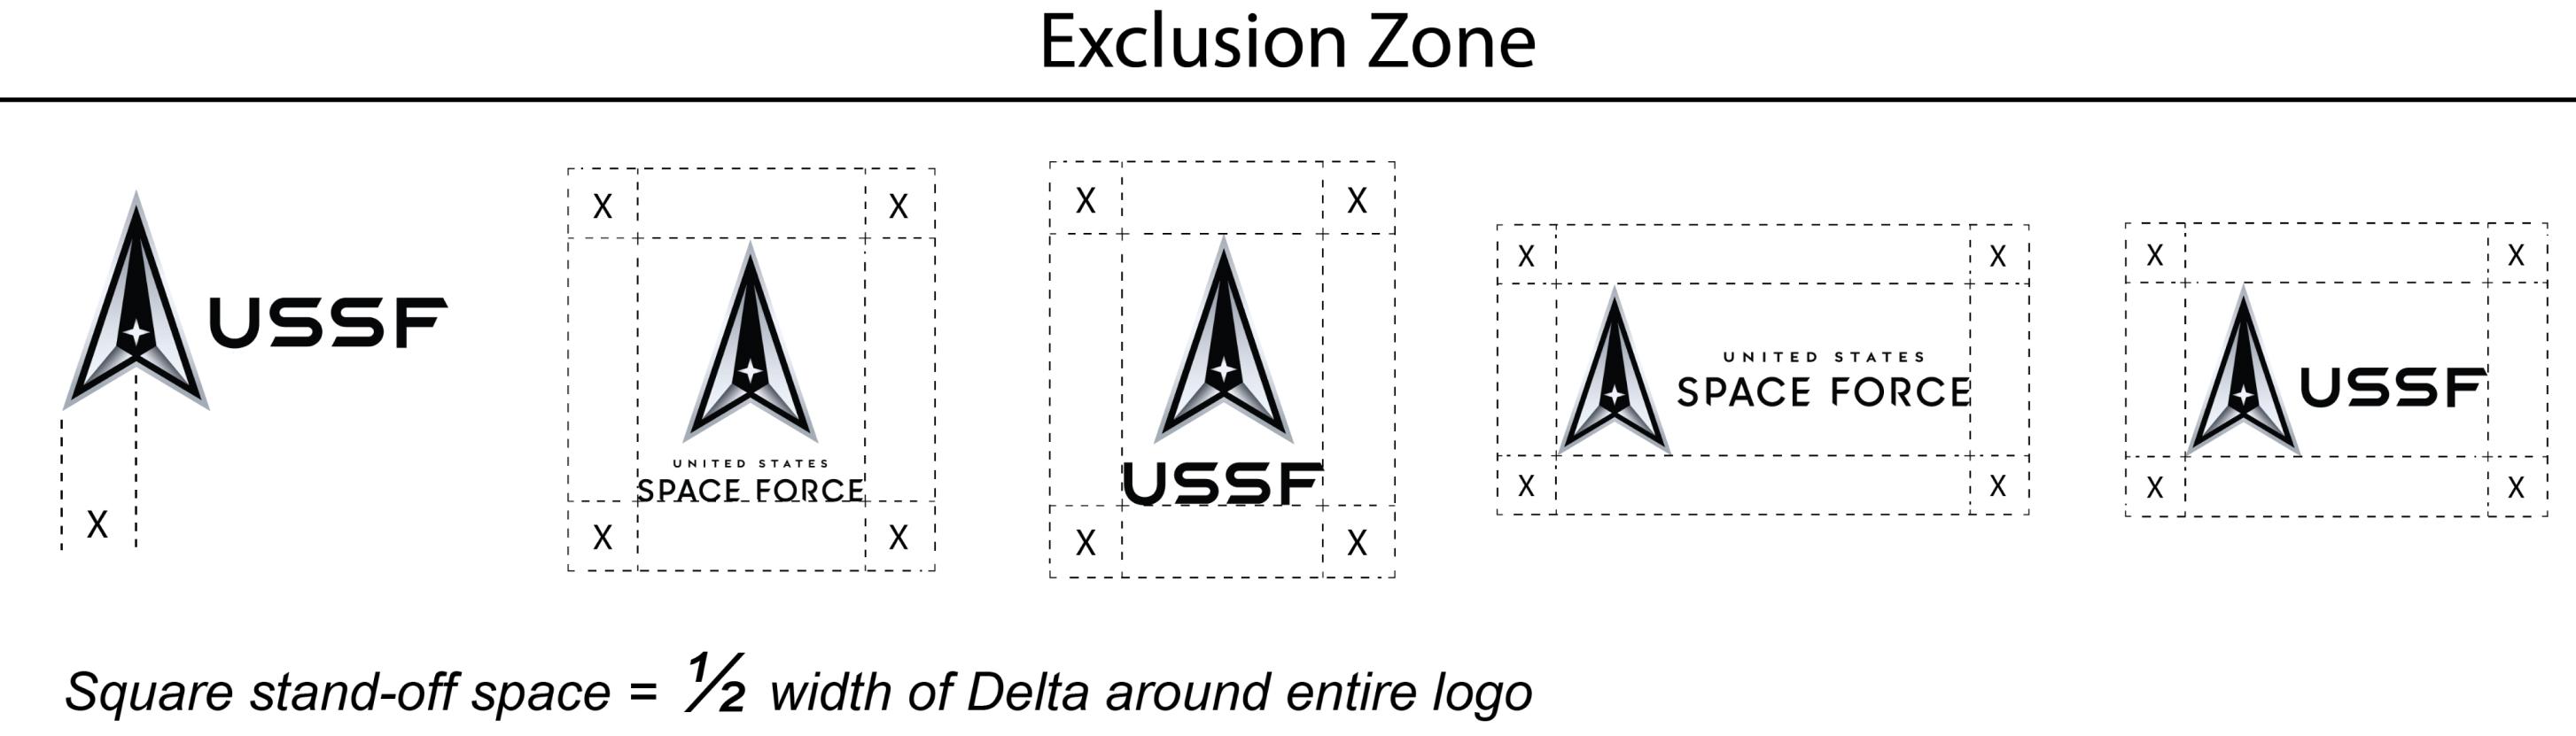 image demonstrating proper Exclusion Zone